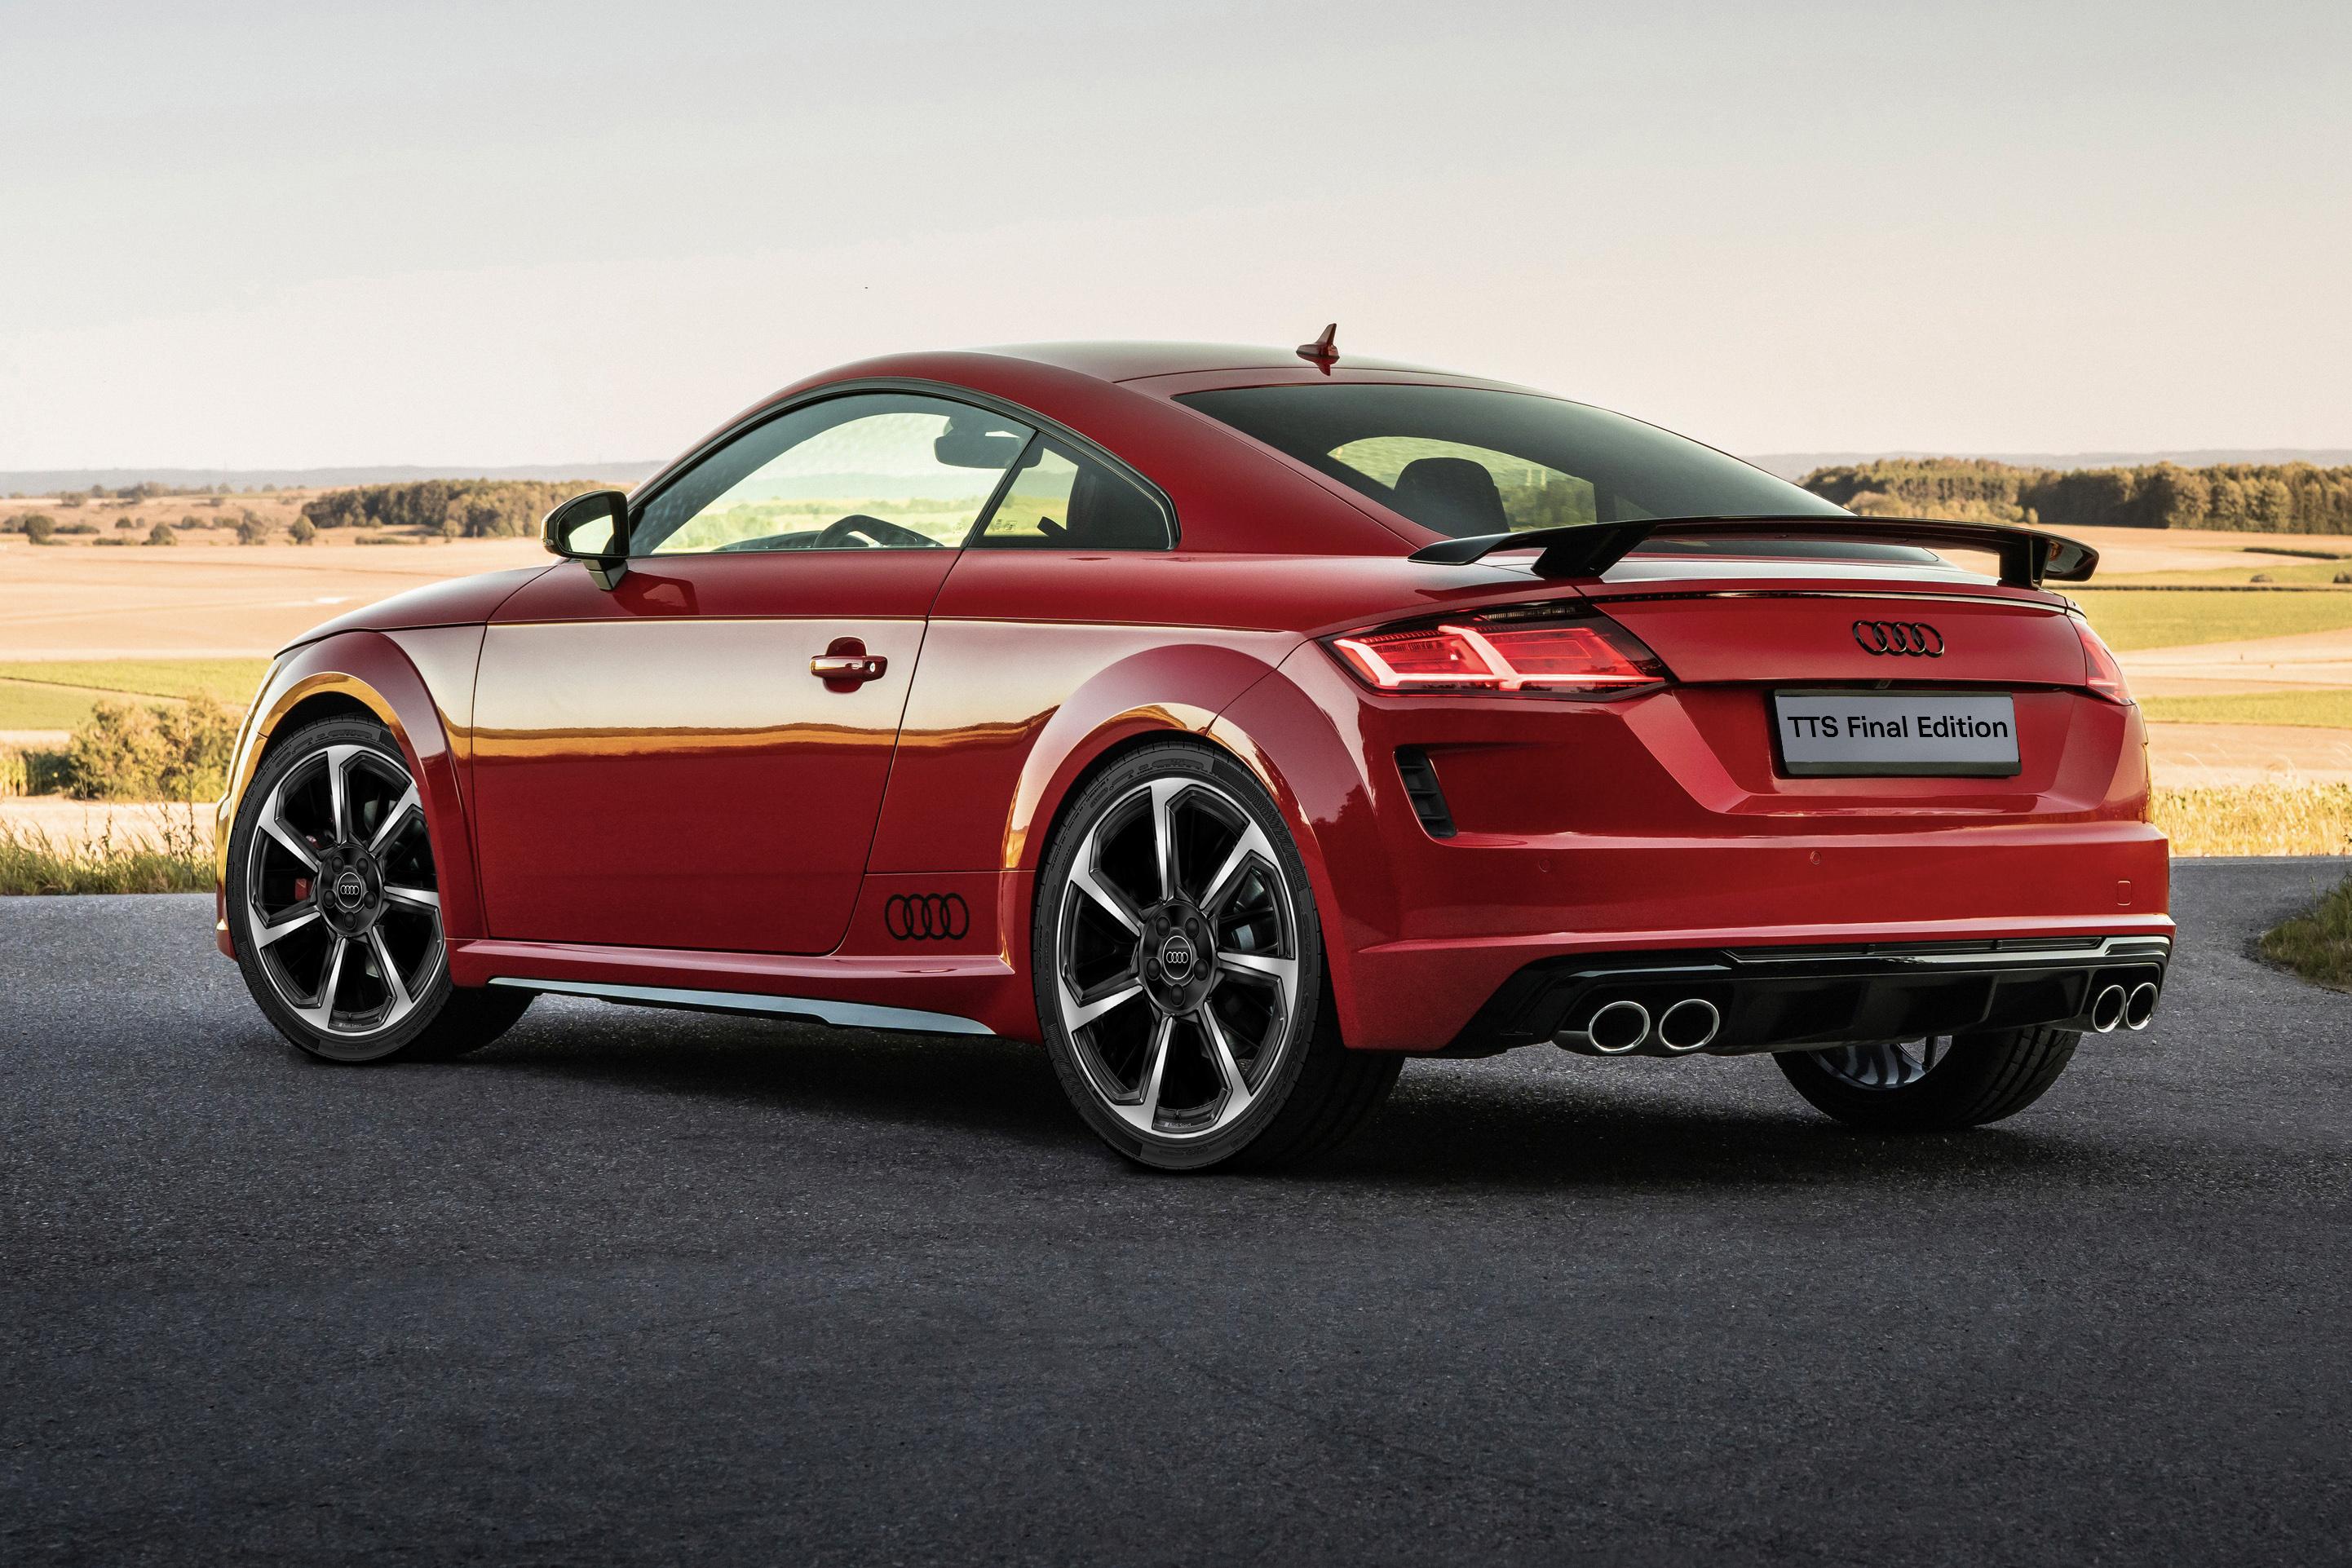 Audi TT Production Ends After 25 Years